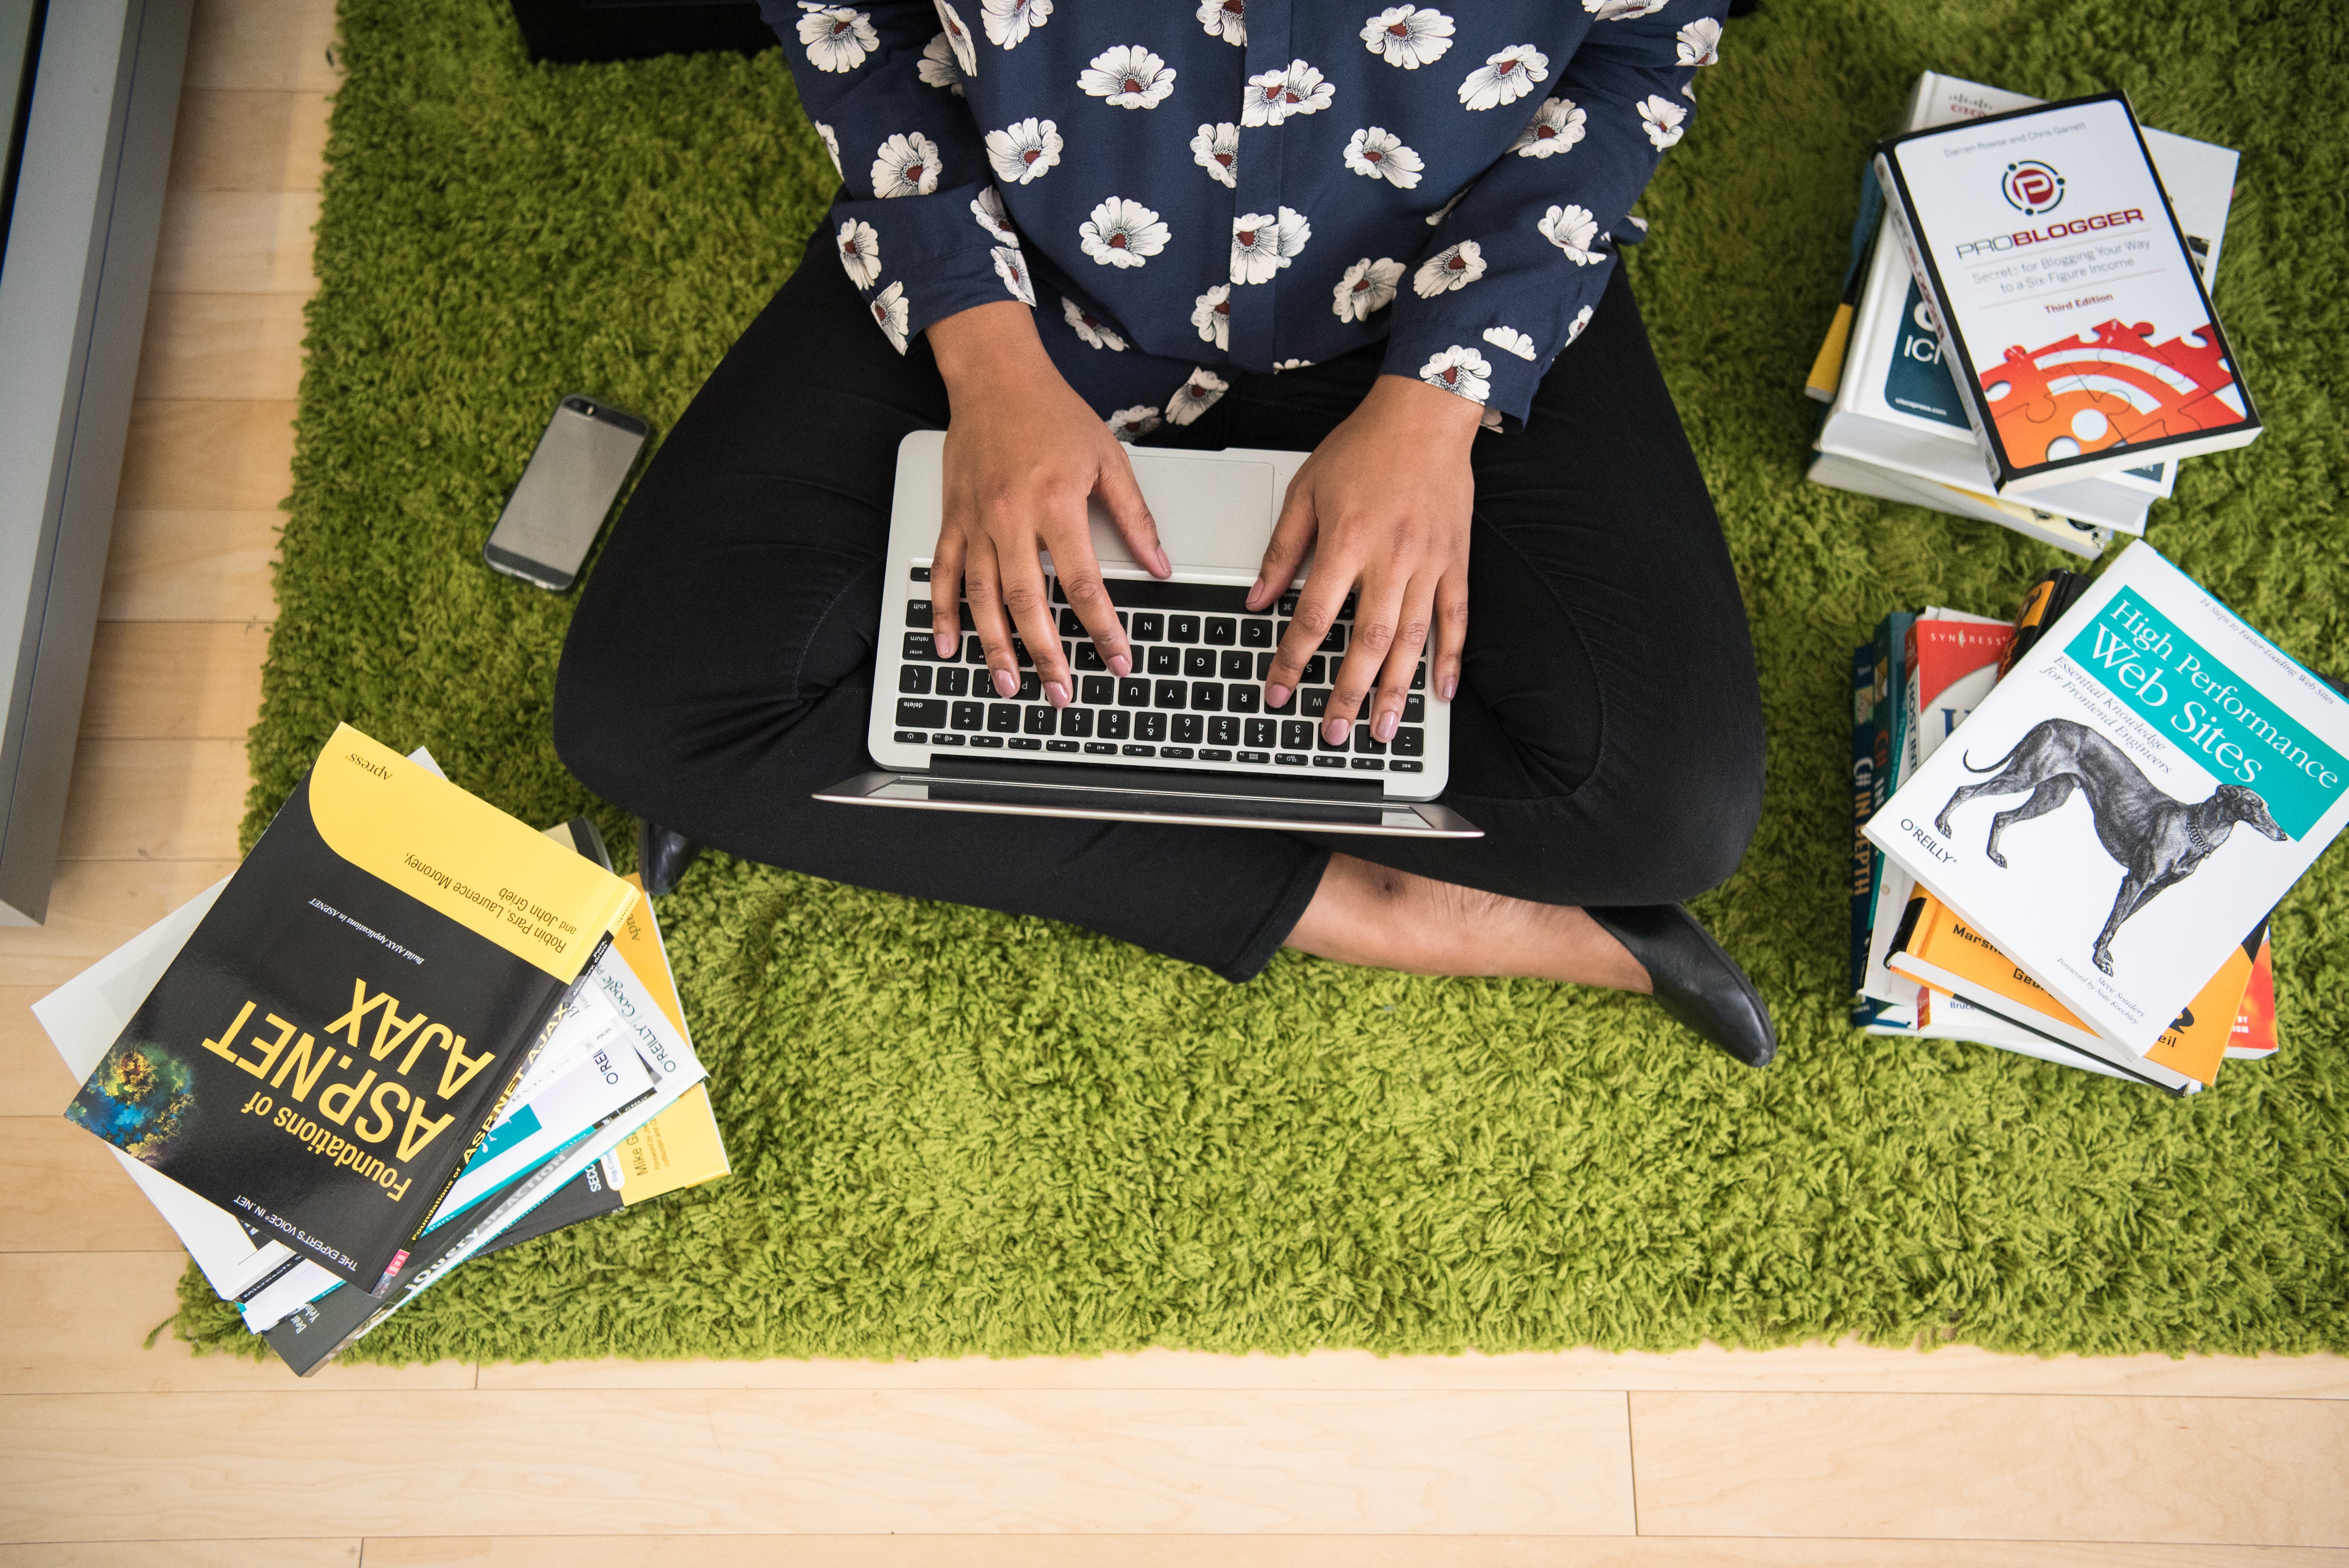 A woman surrounded by books typing on her laptop